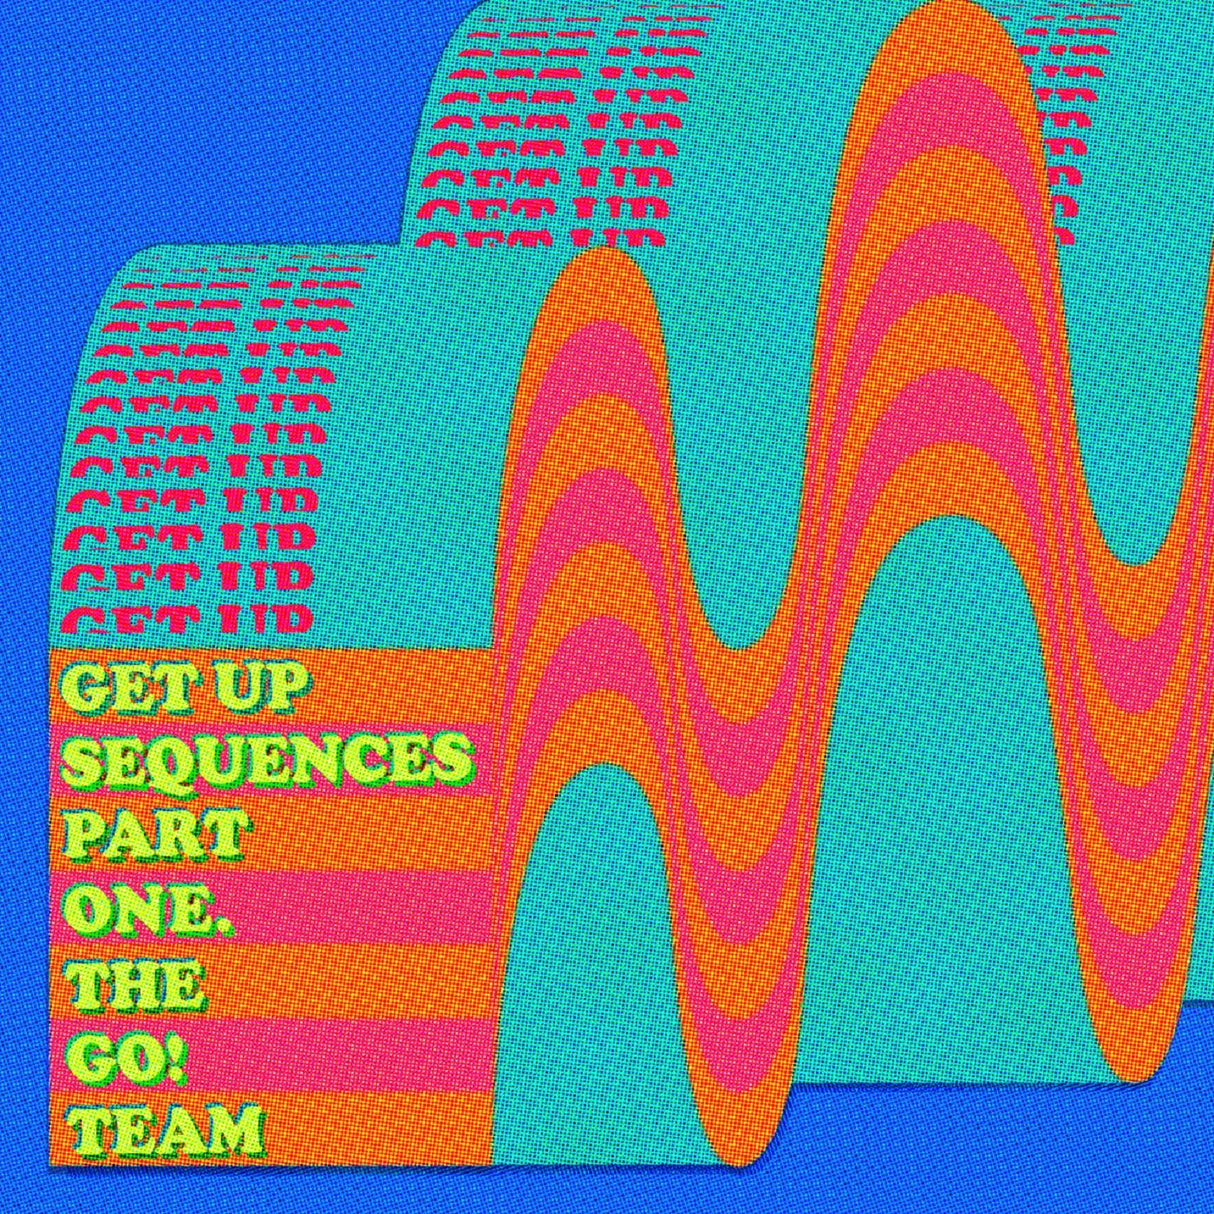 Get Up Sequences Part One [CD]